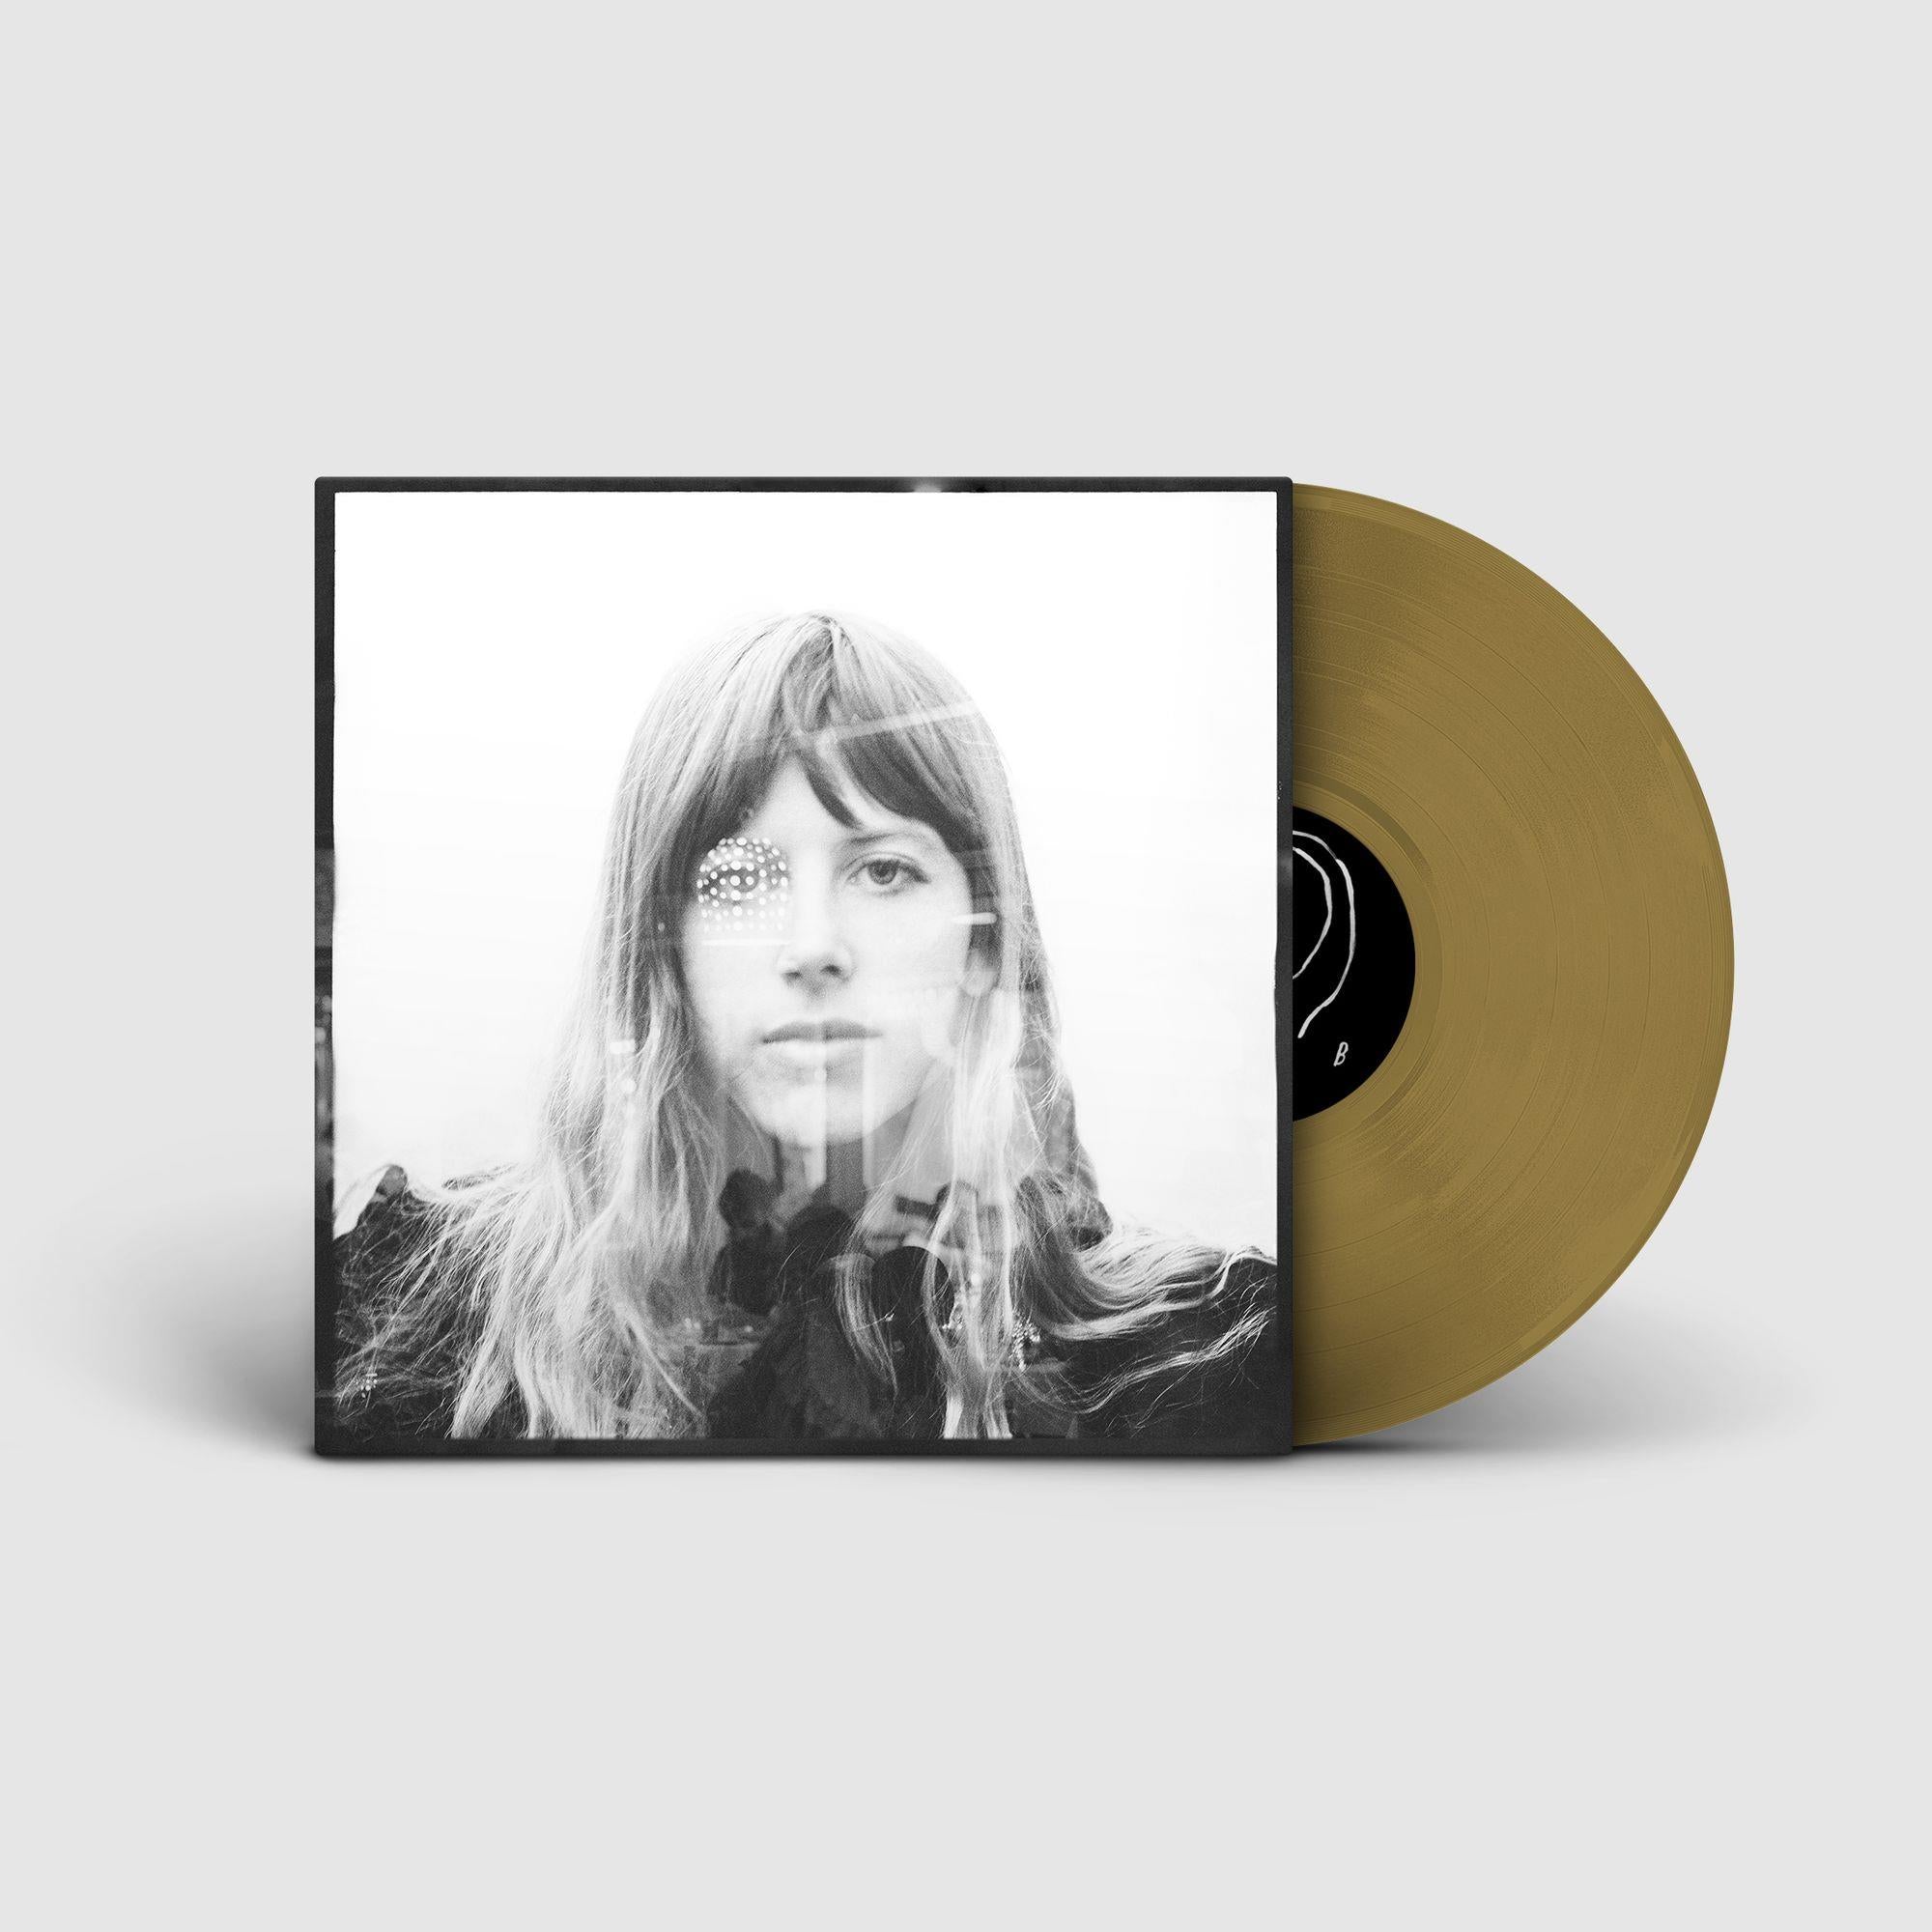 star eaters delight (limited loser edition gold vinyl)